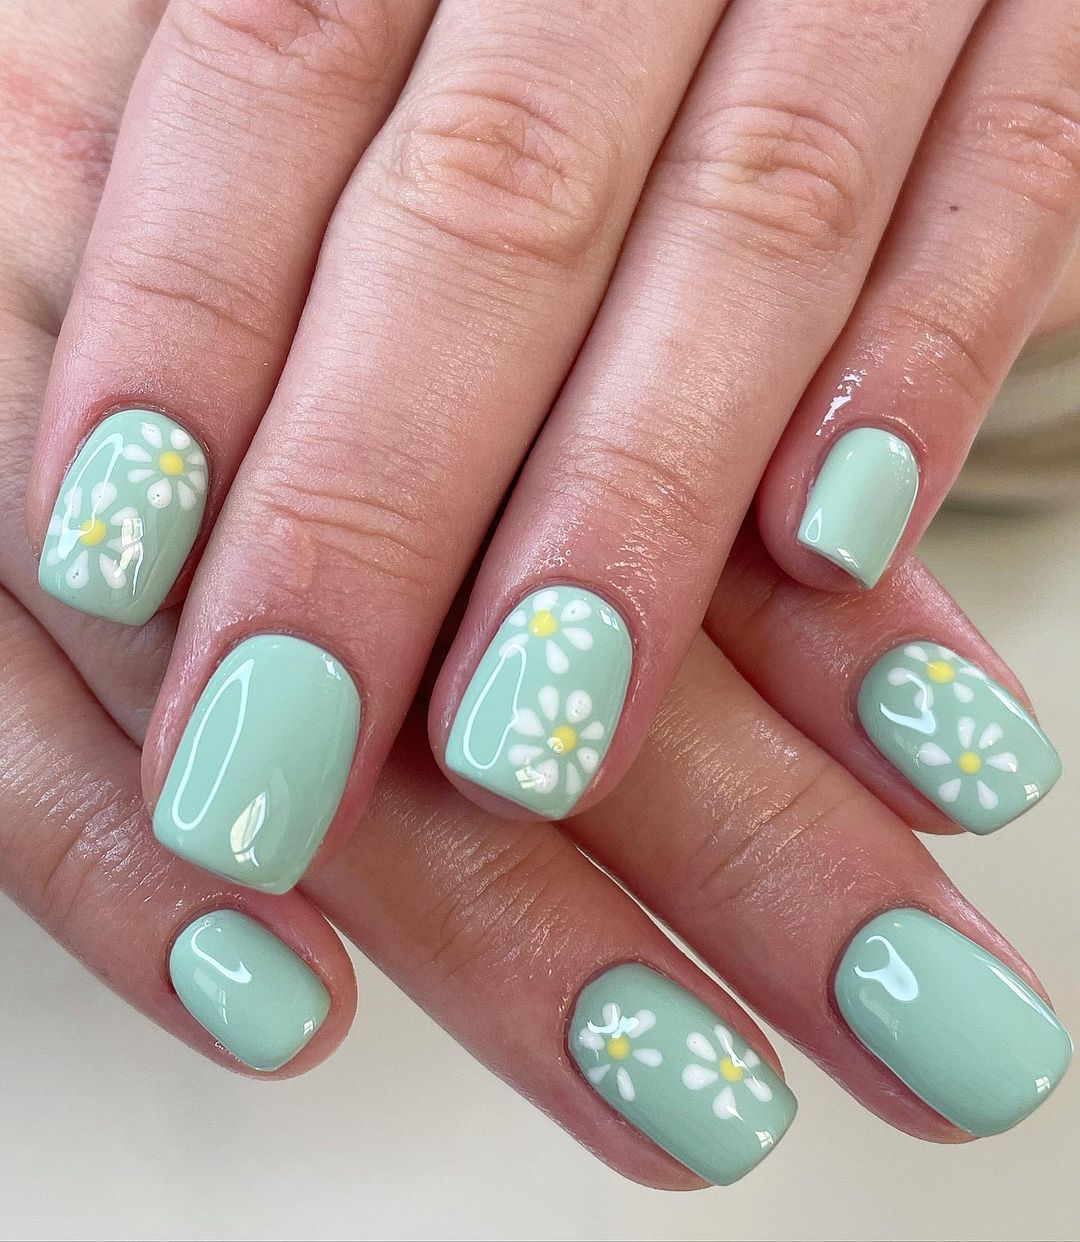 Mint and daisy sets